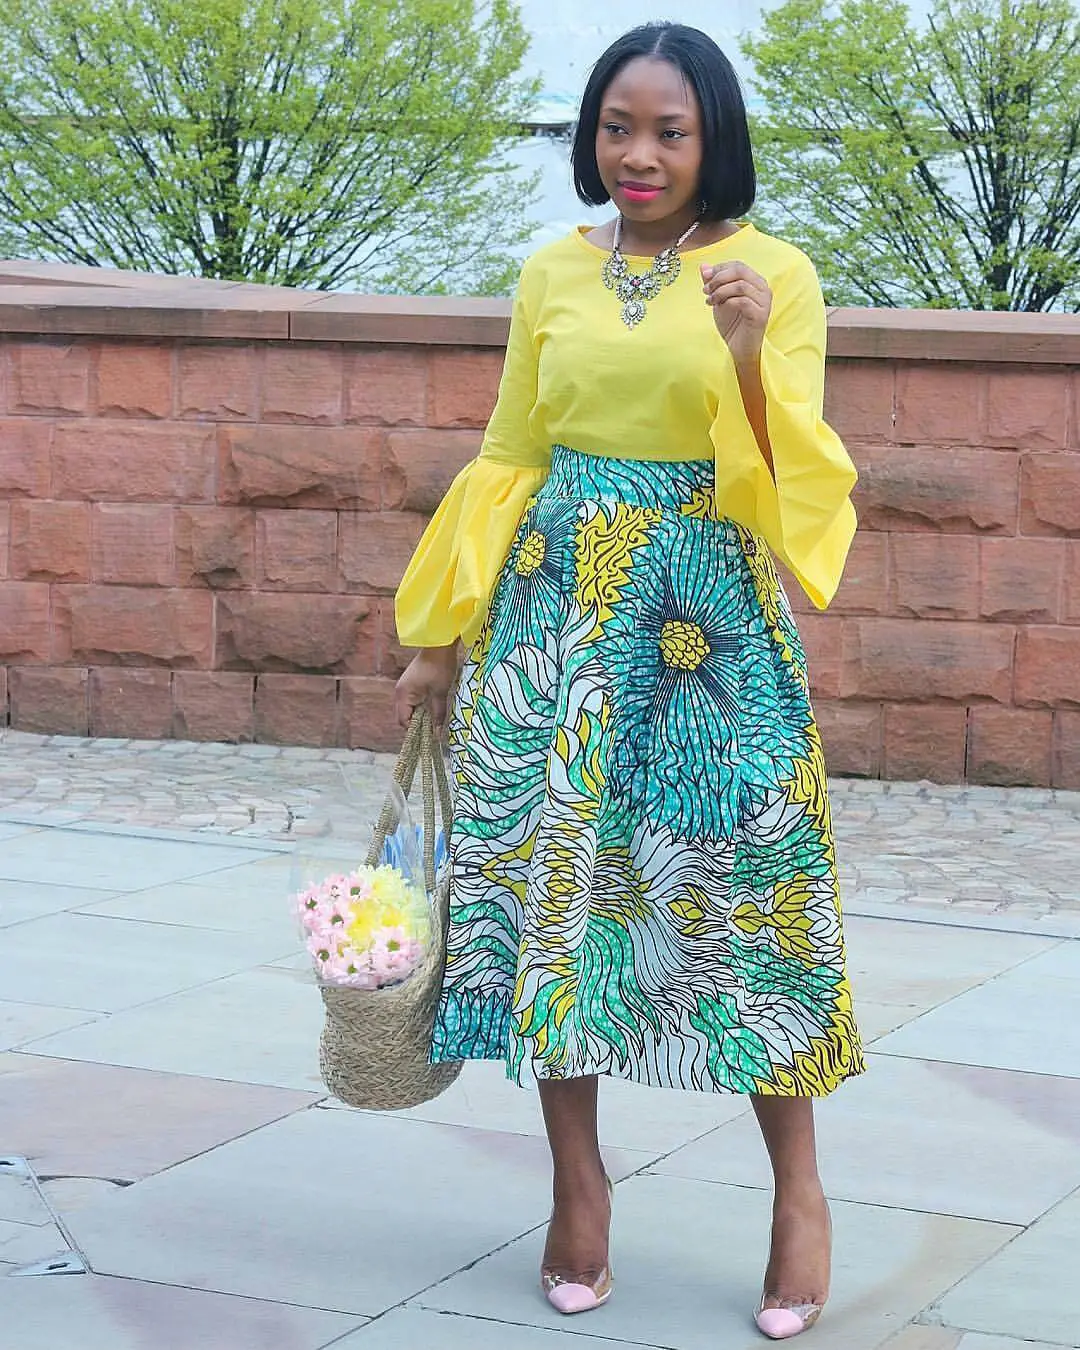 Latest Ankara Styles Instagram Feed Us Over The Weekend. 